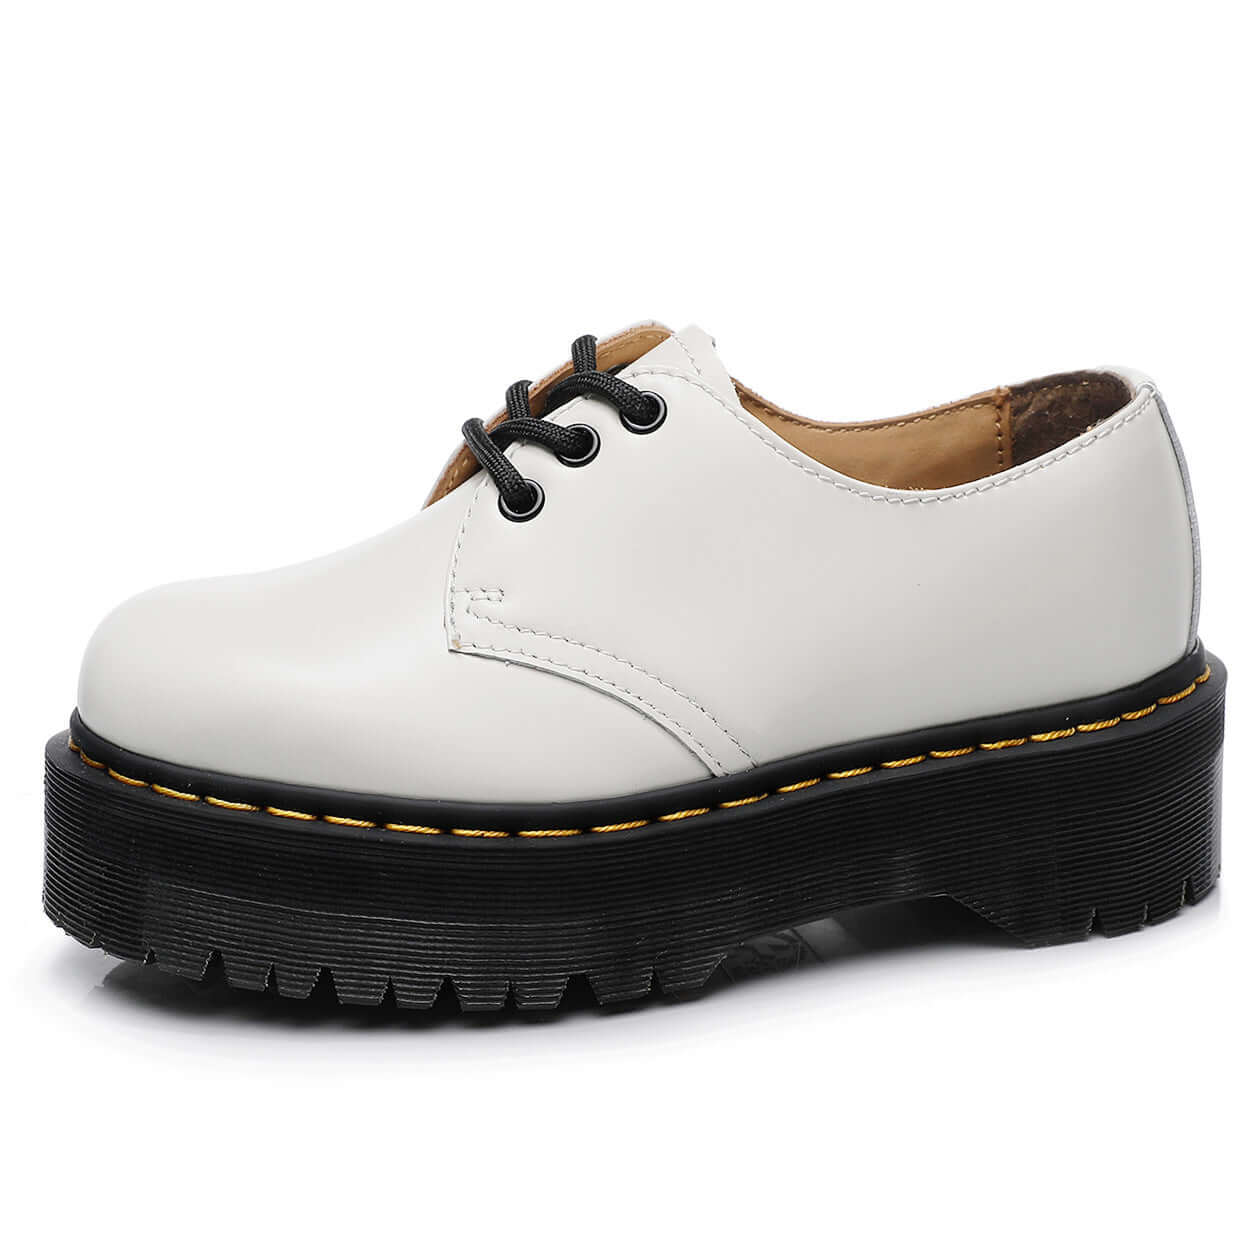 Microdeer 2022 Martens 8053 Leather Platform Casual Shoes Dr Womans shoes 5-eye style Heightening shoes Fashion casual shoes